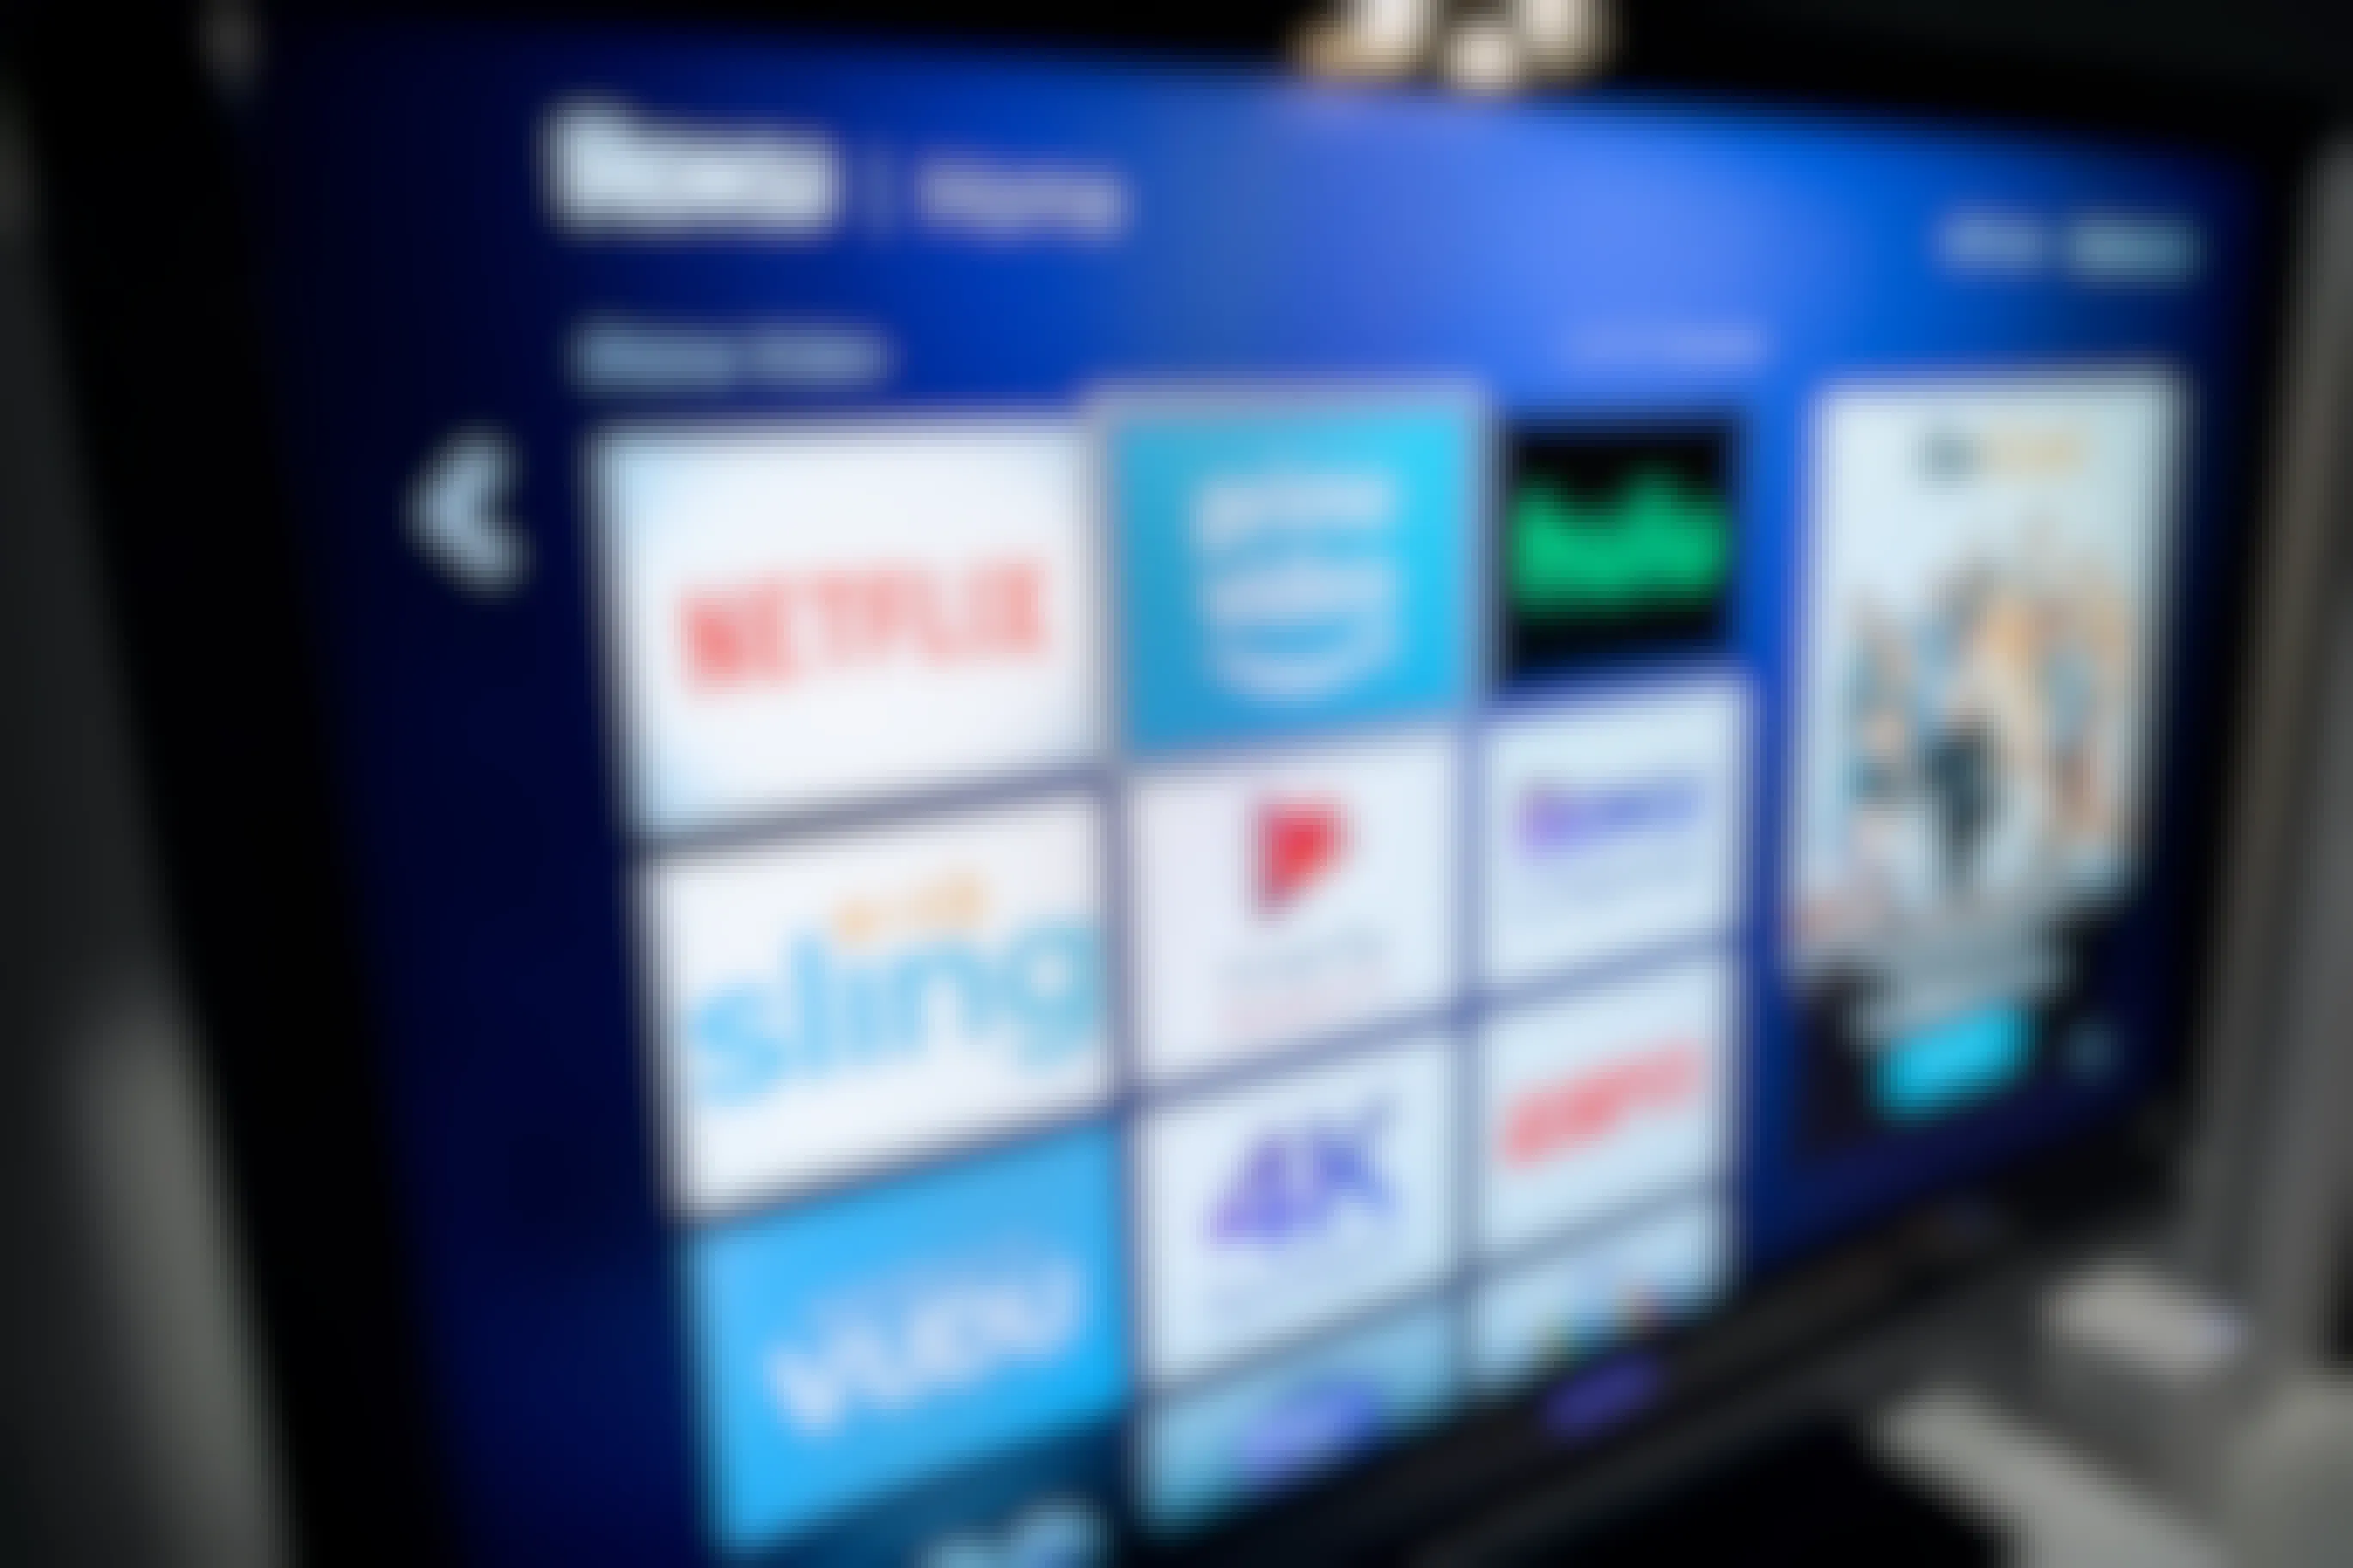 ROku screen with different streaming apps like hulu and amazon prime video available